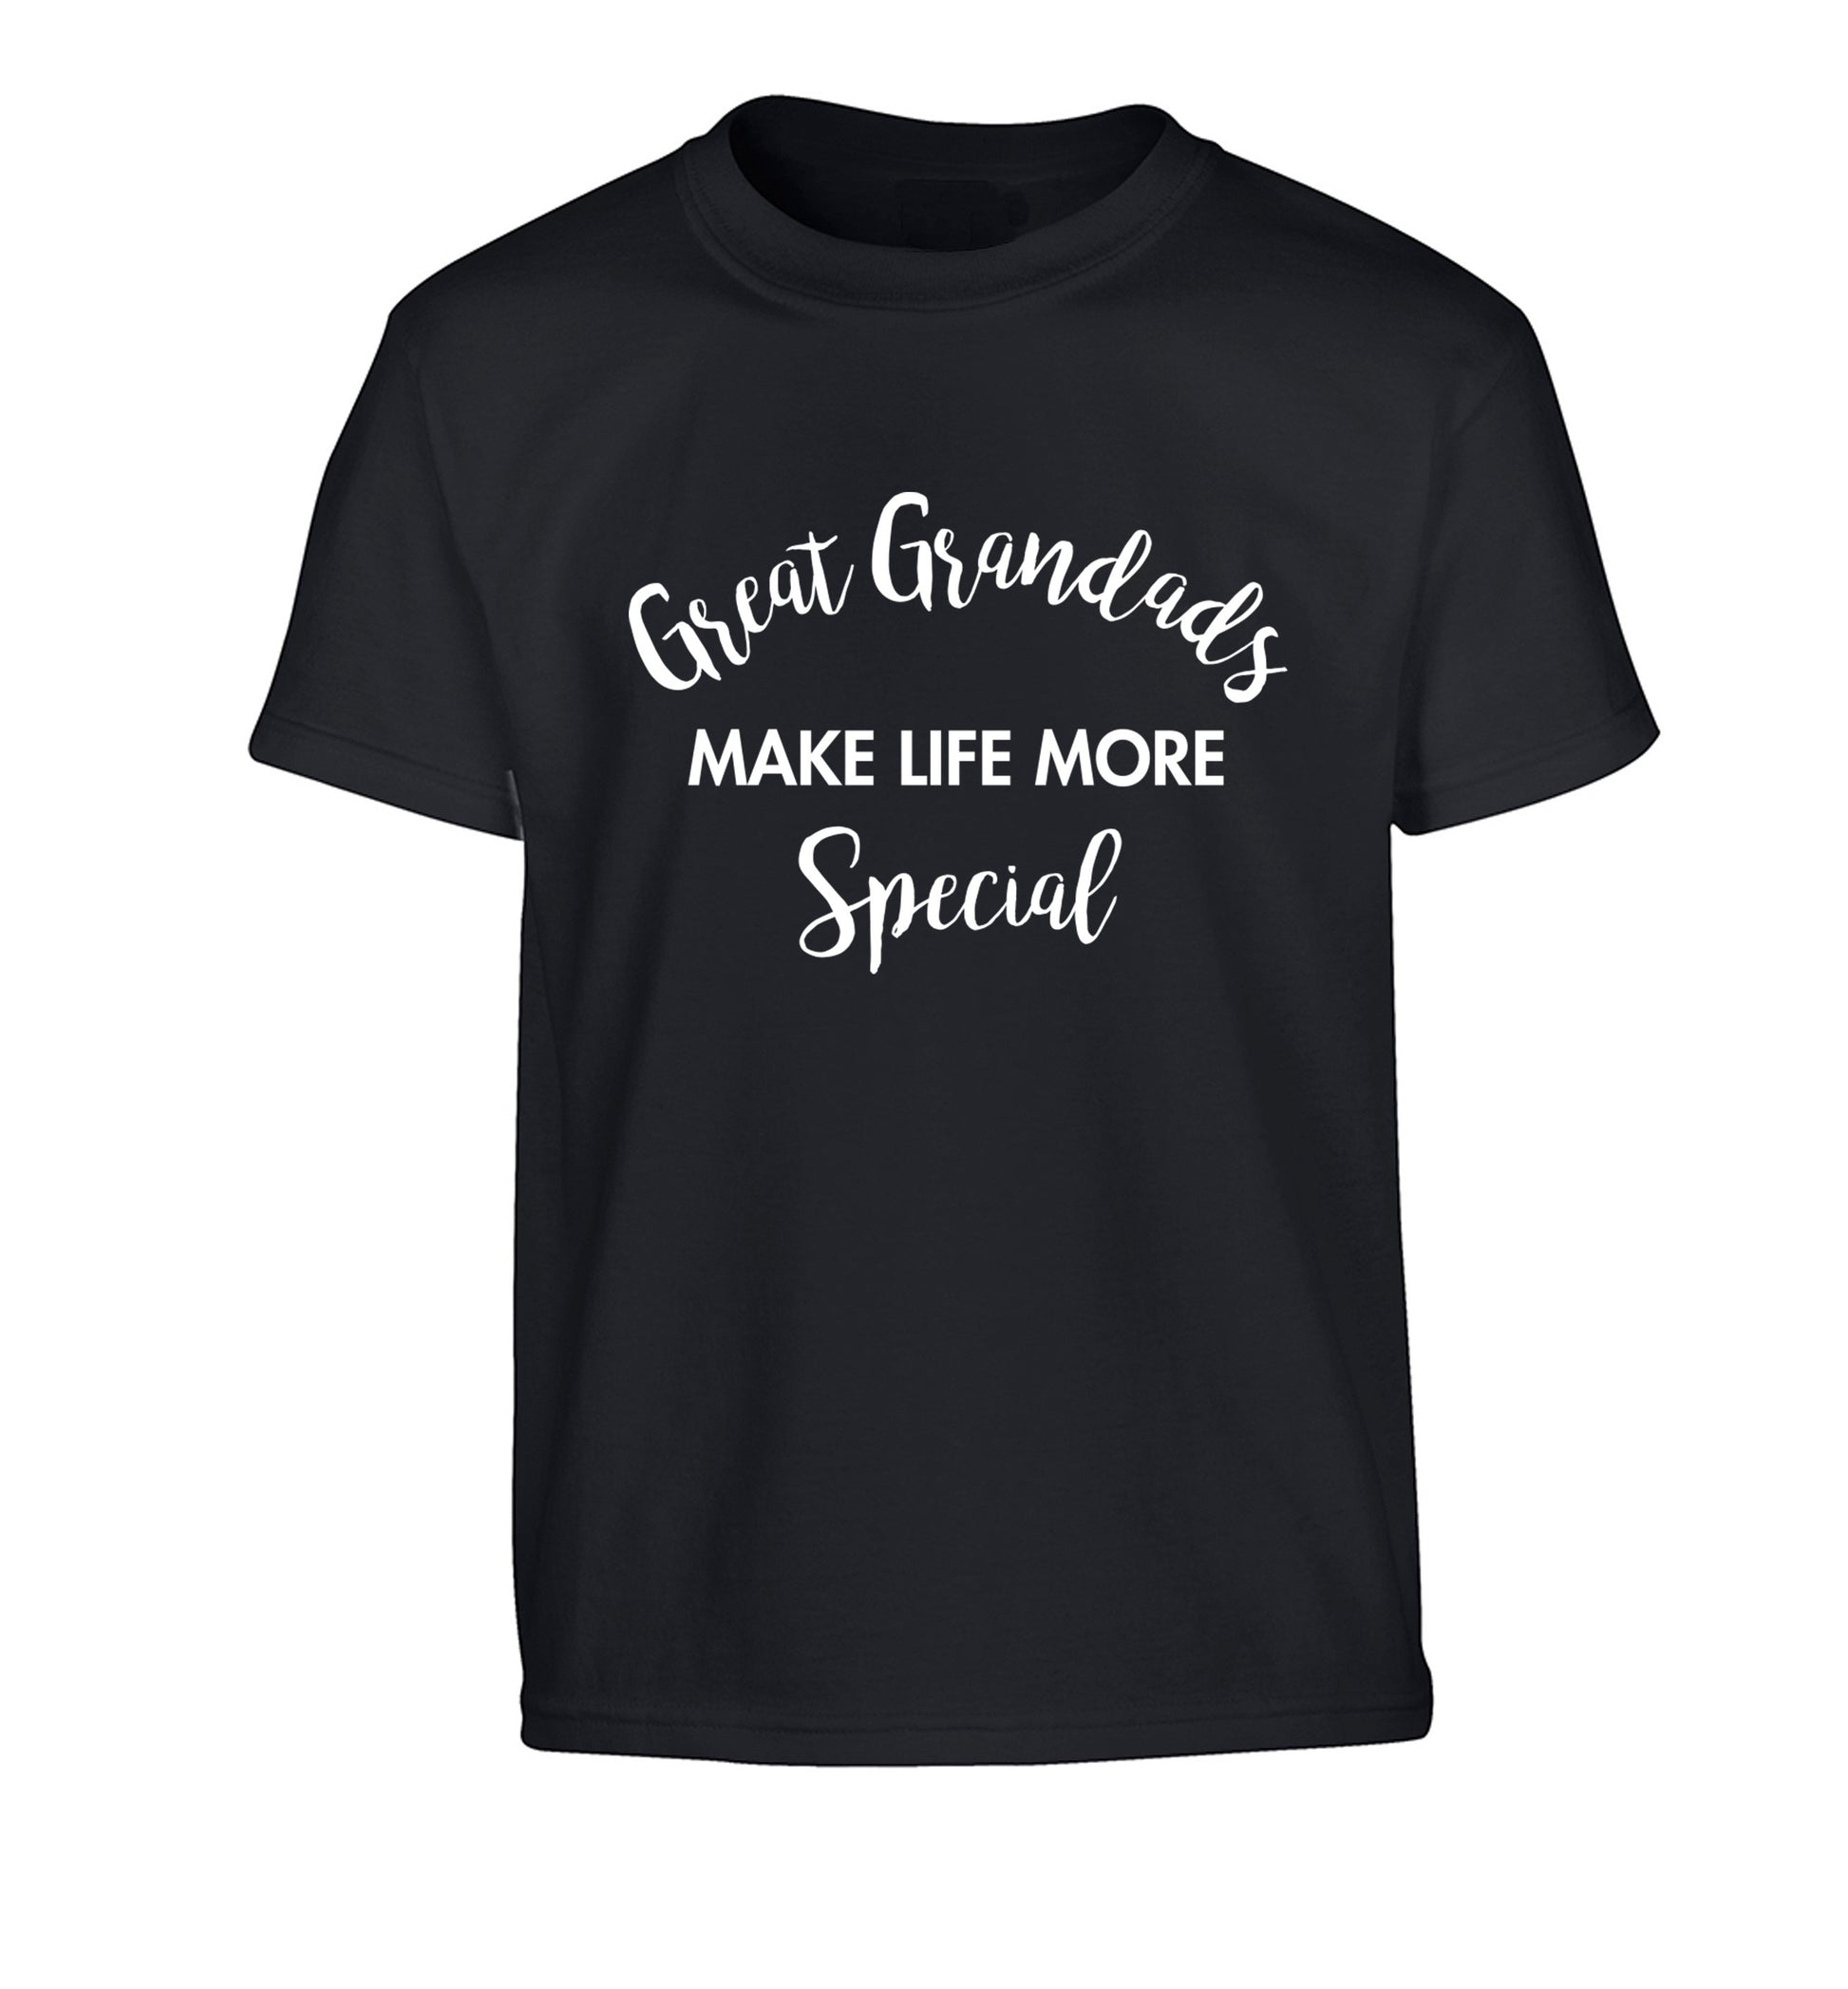 Great Grandads make life more special Children's black Tshirt 12-14 Years